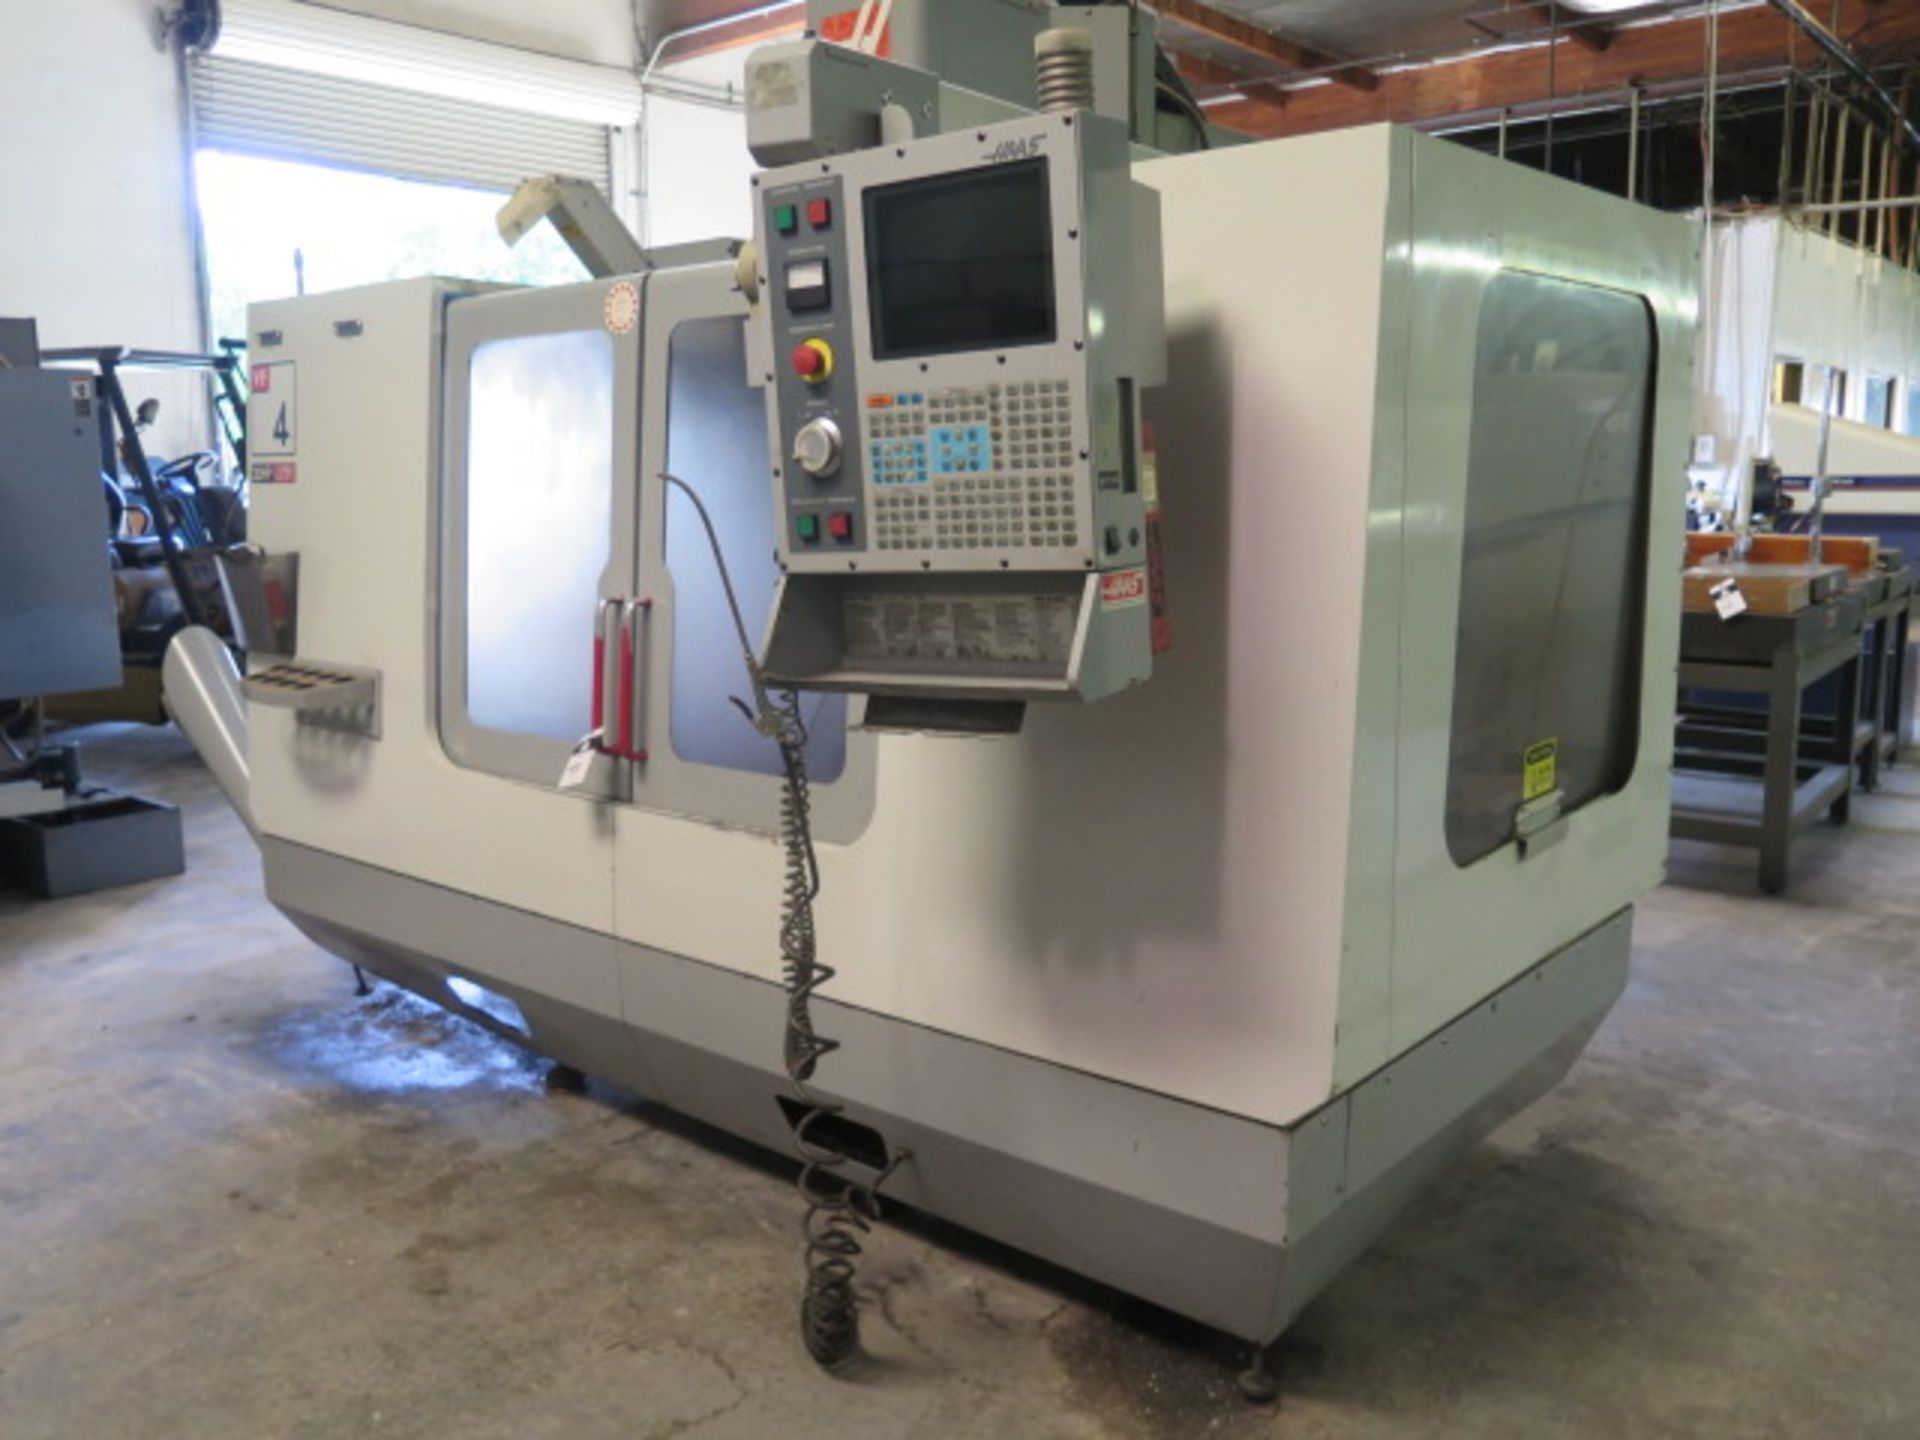 2002 Haas VF-4B CNC VMCs/n 28982 w/ Haas Controls, Hand Wheel, 20-Station ATC, SOLD AS IS - Image 2 of 16